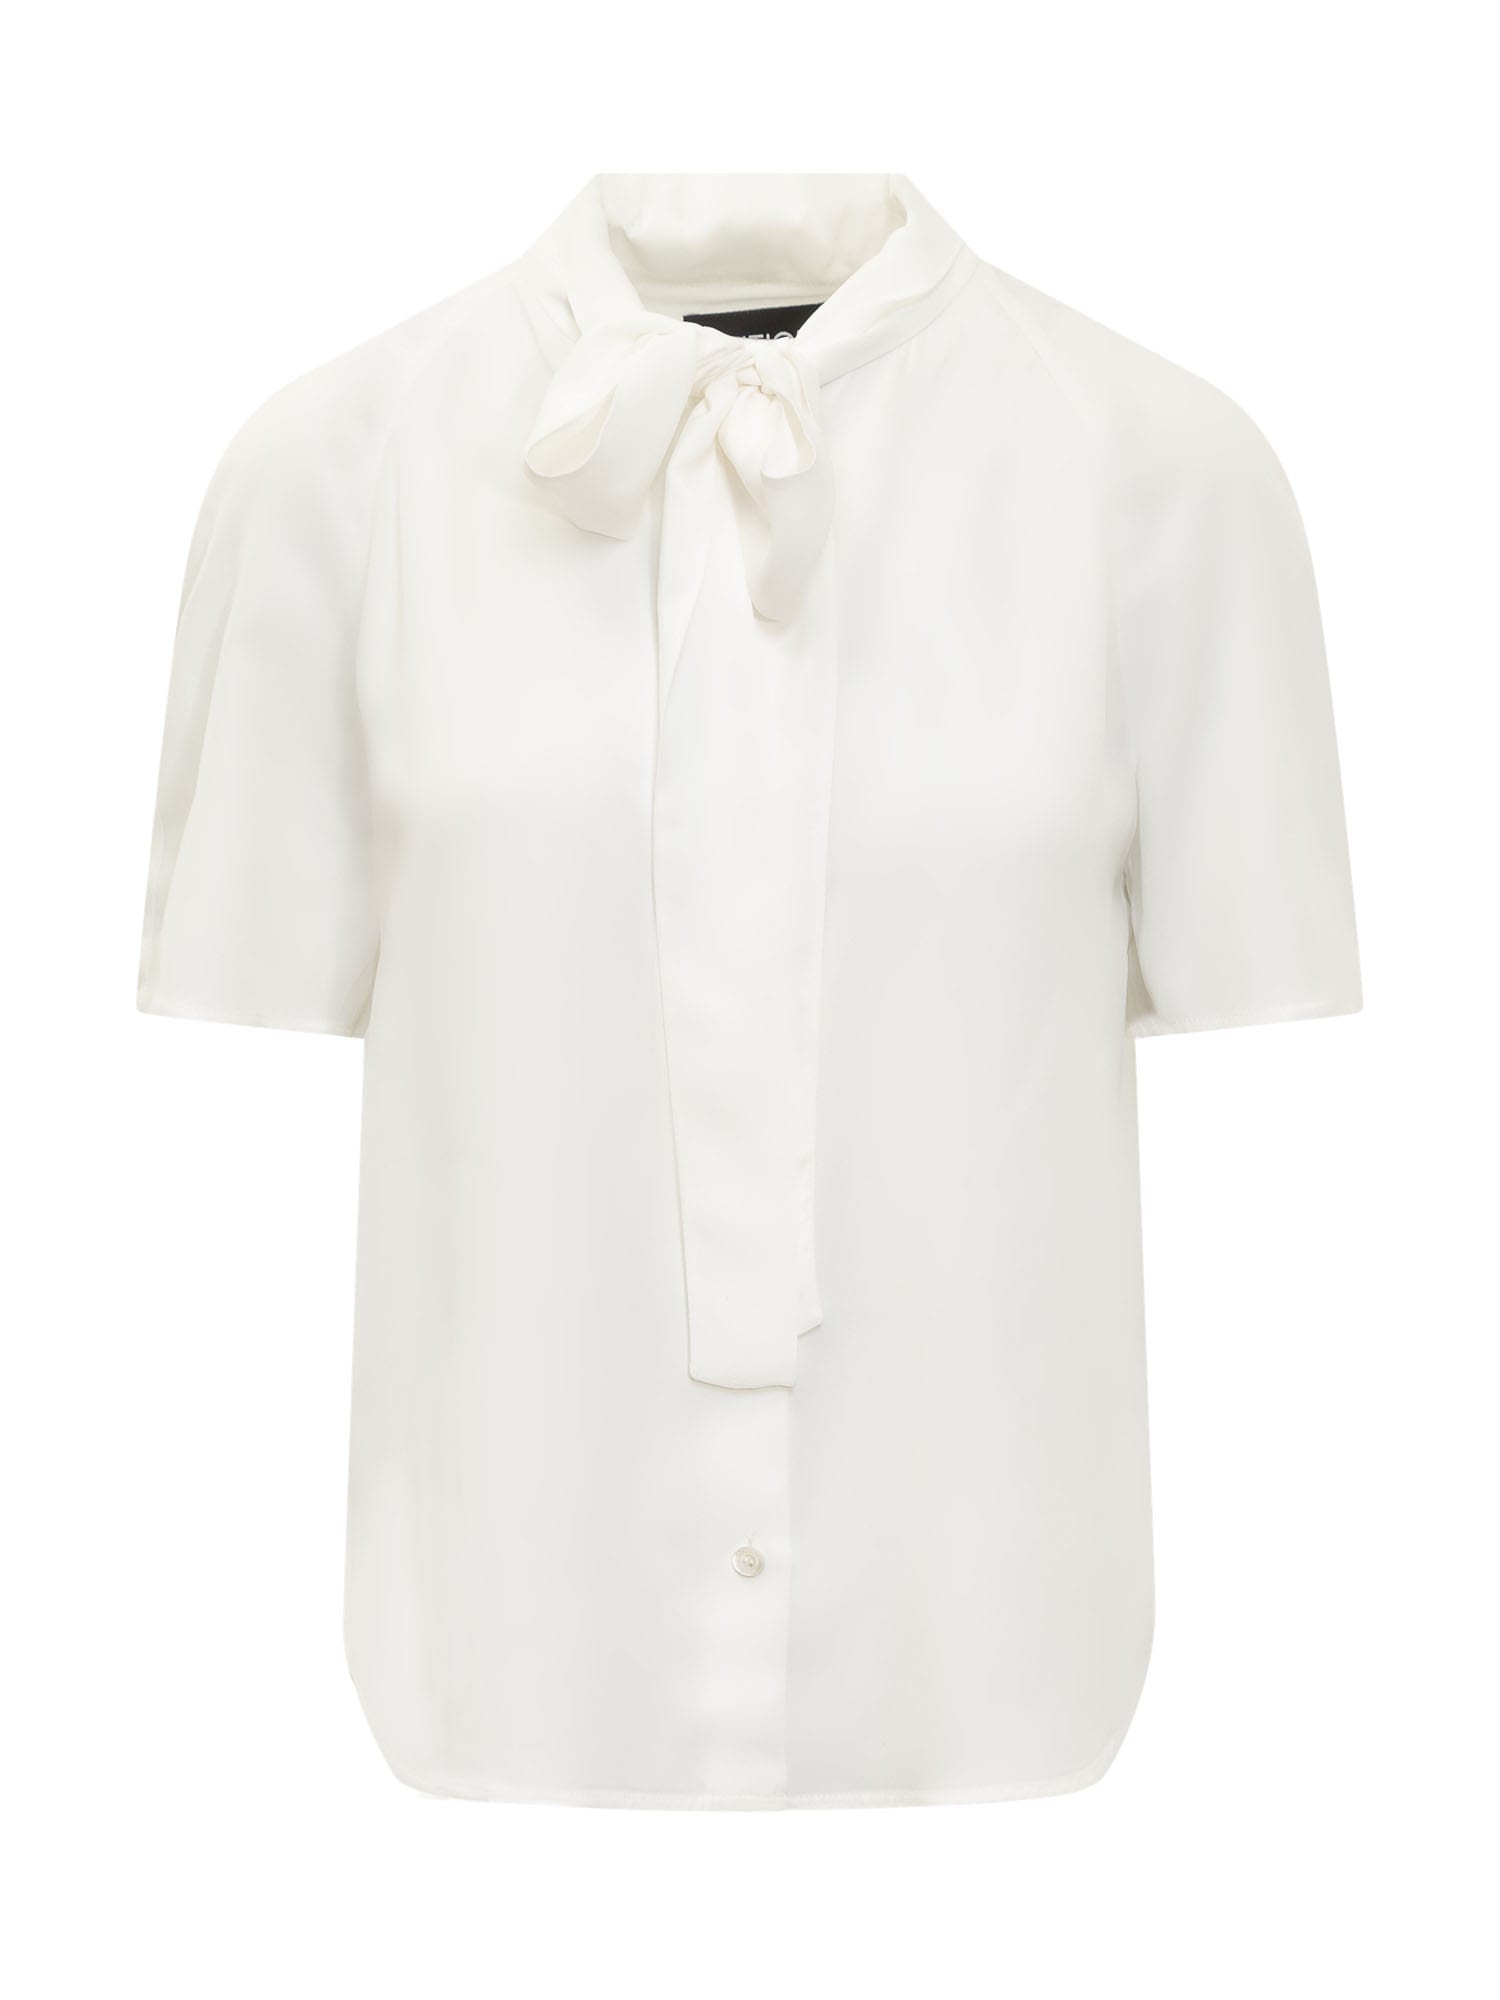 Boutique Moschino Shirt With Bow